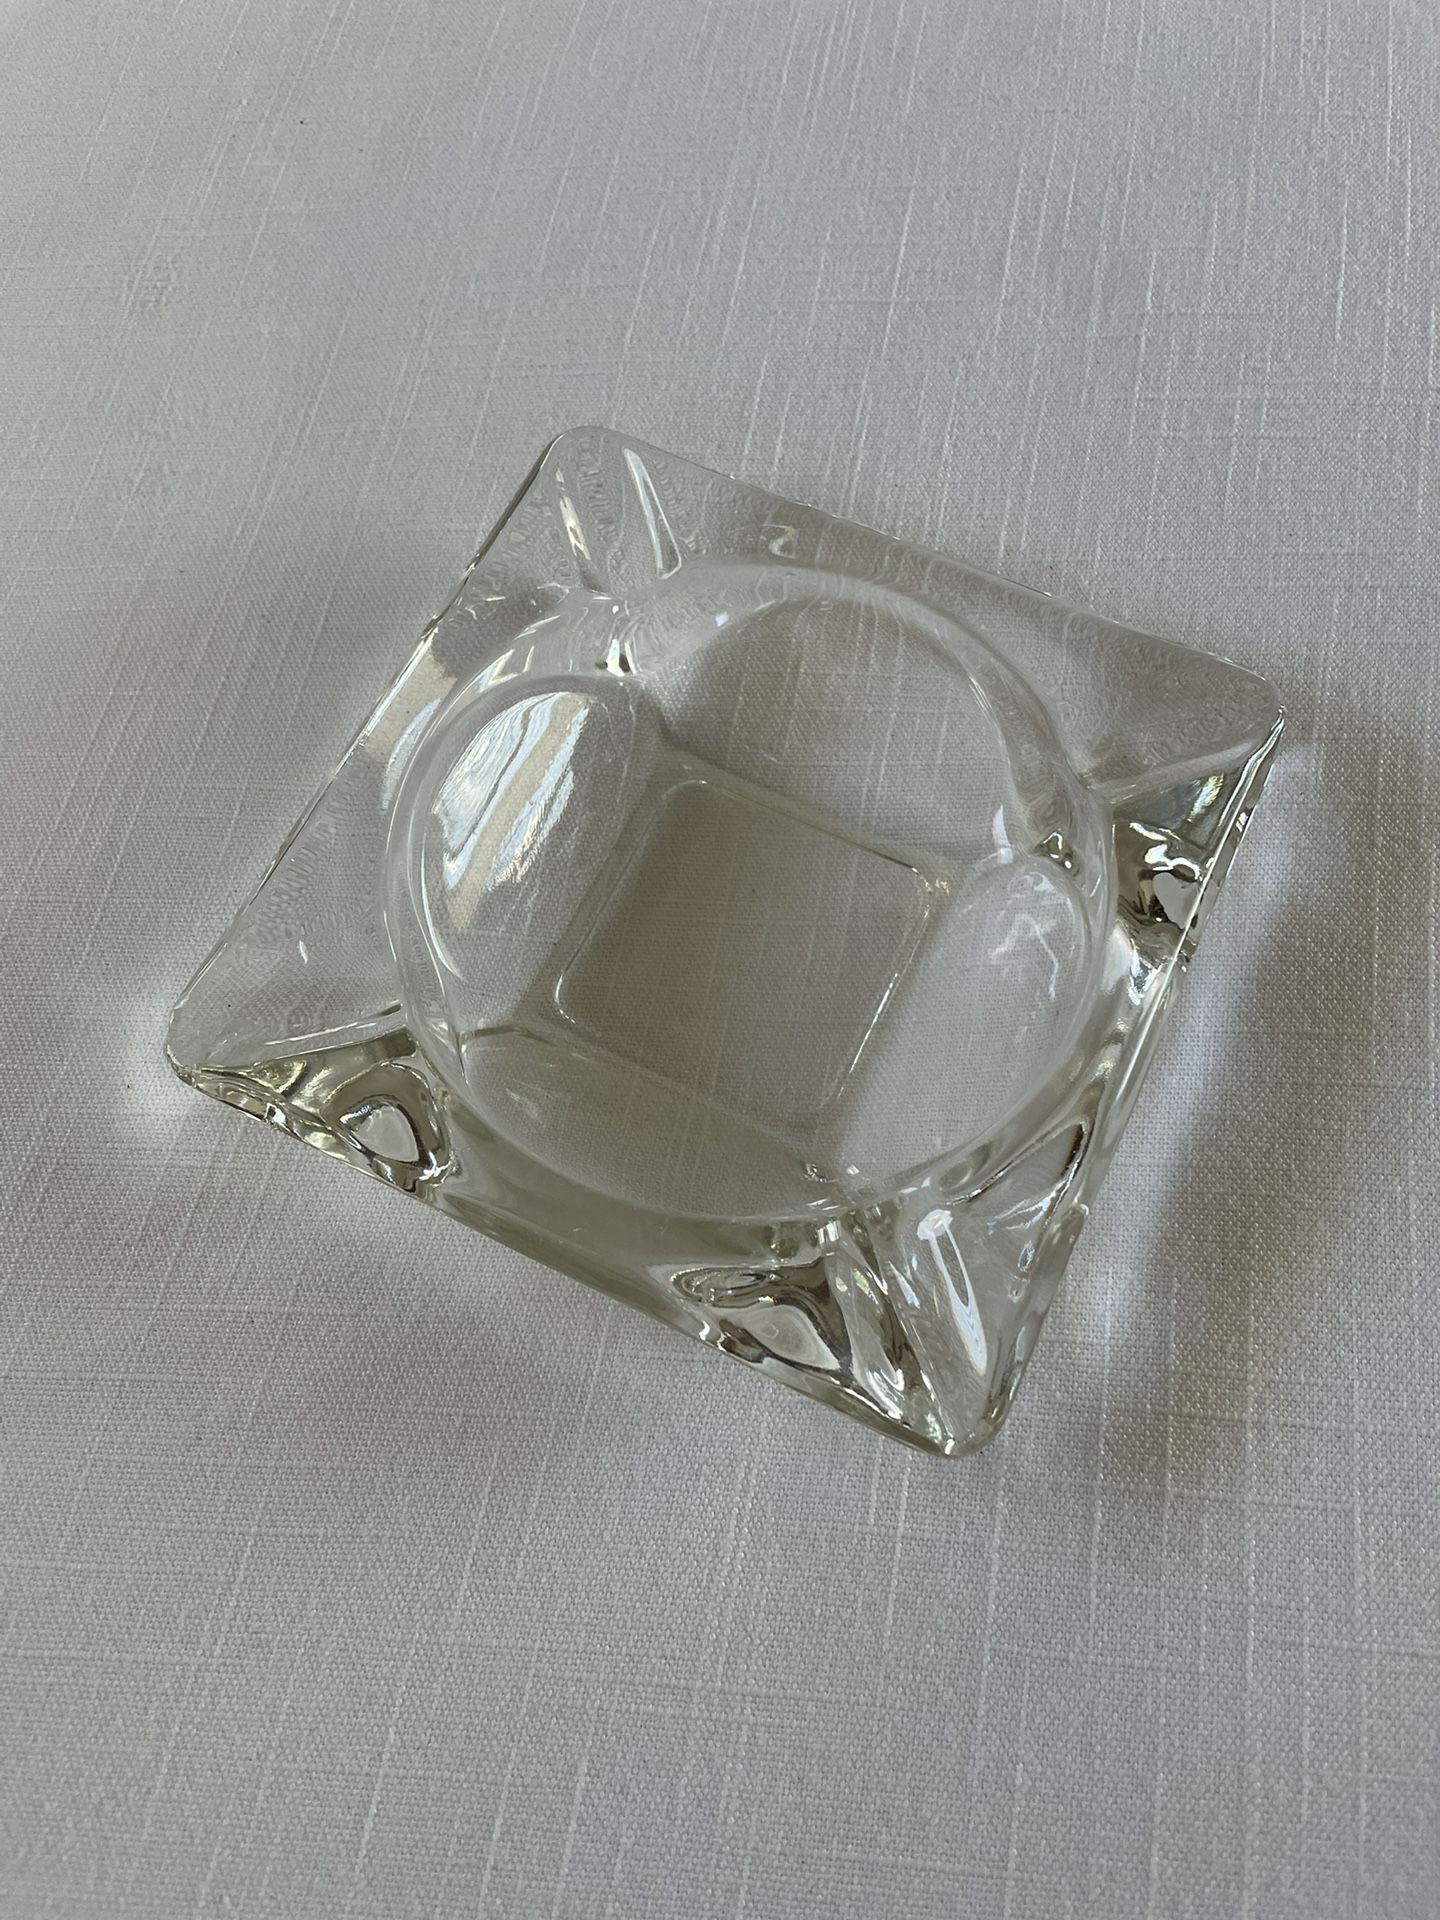 Vintage 70’s Glass Ashtray Catchall for Keys or Wallet